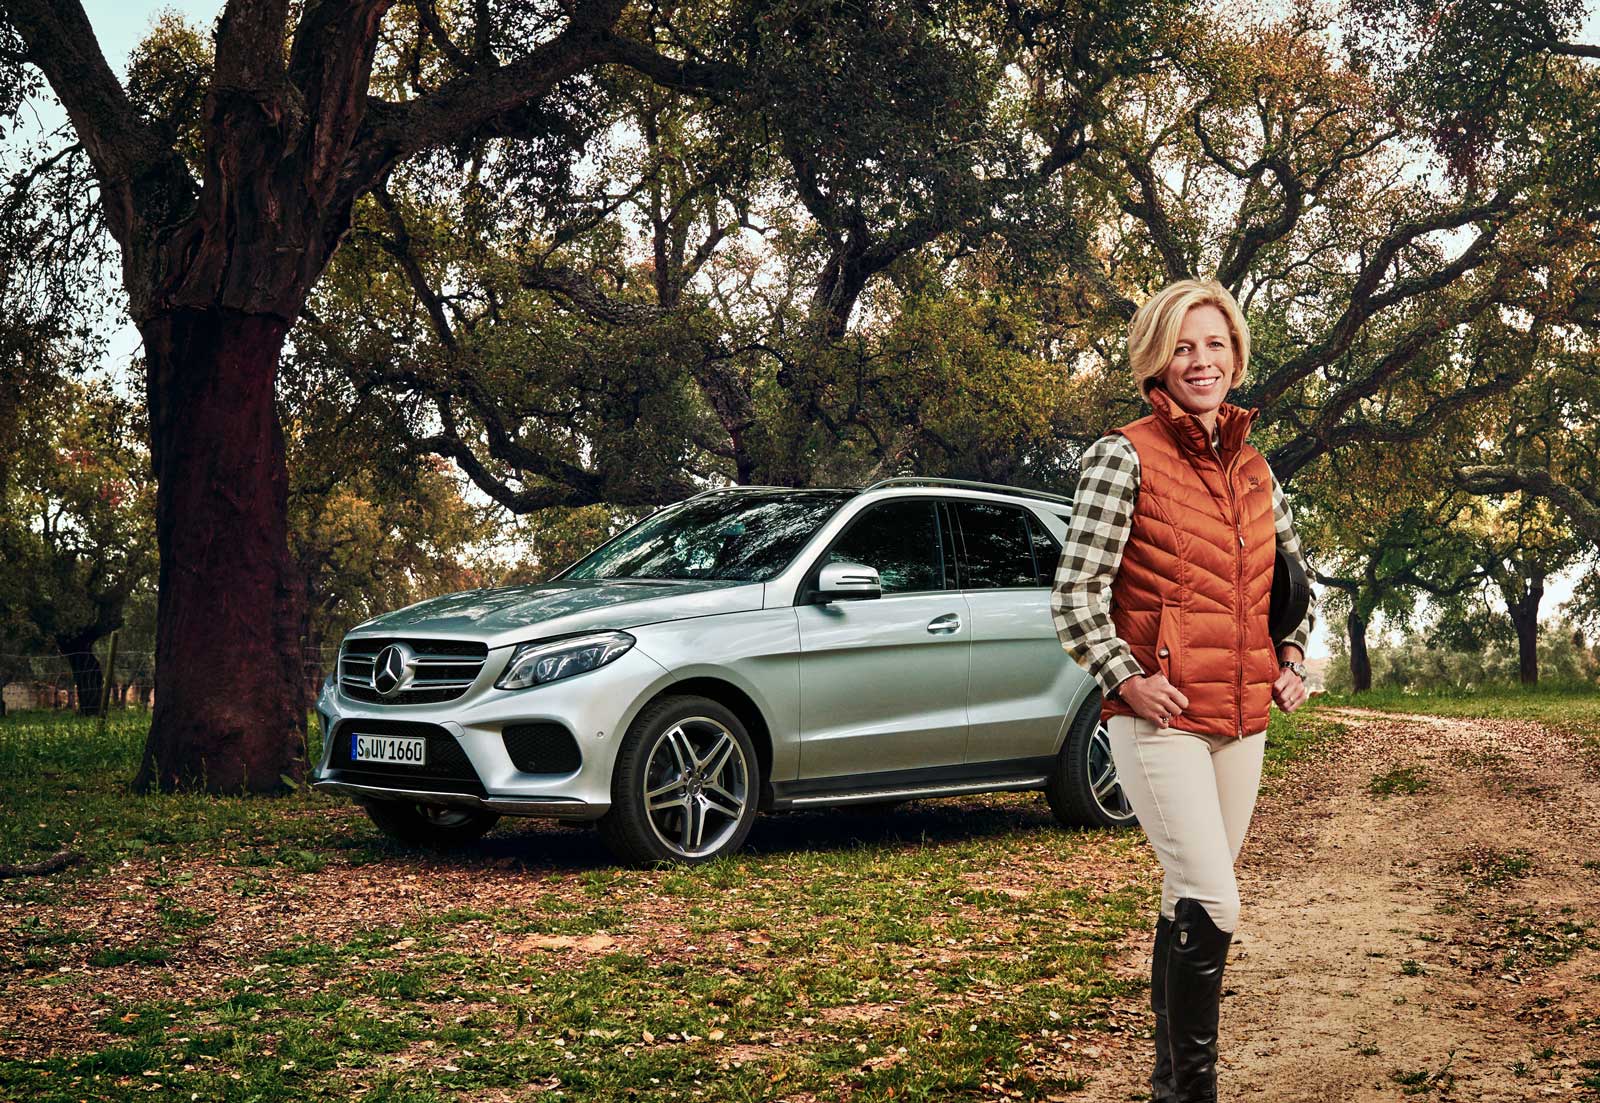 Show jumper Meredith Michaels-Beerbaum opts for the GLE